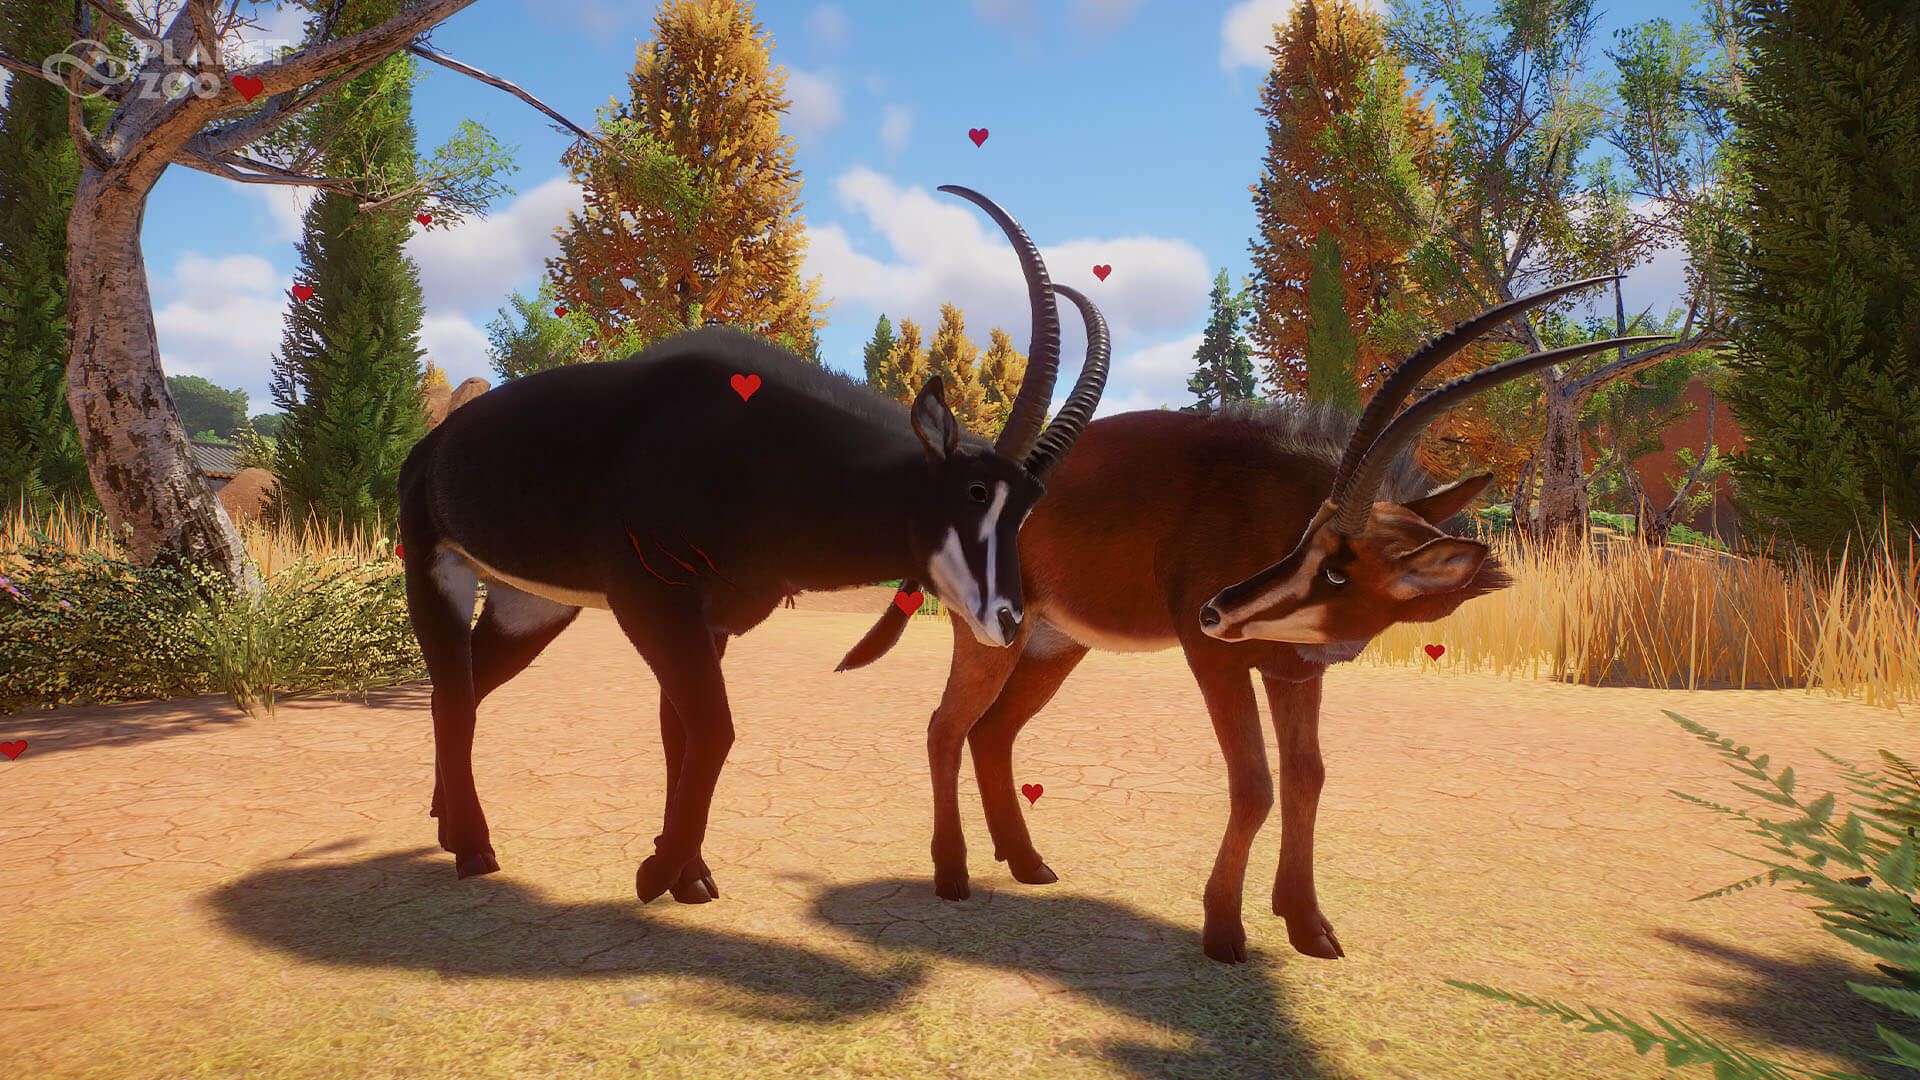 Planet Zoo's Easter Egg Cheats Let You Floof Up Your